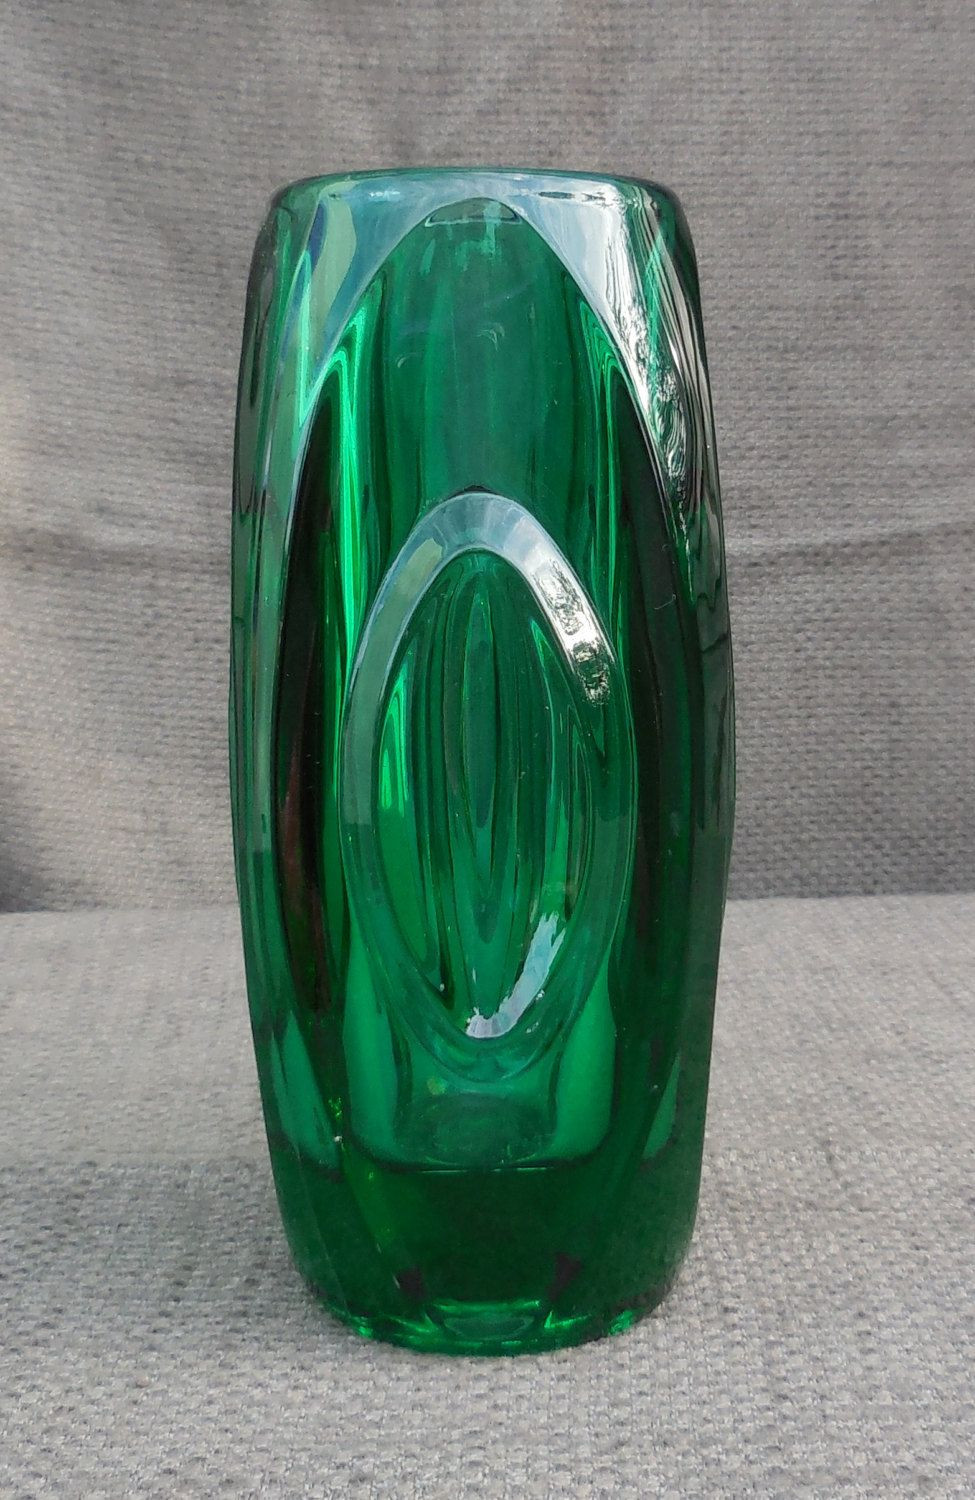 23 Awesome 4 Inch Glass Vase 2024 free download 4 inch glass vase of stunning 1950s vintage rosice czech lens green art glass vase by with stunning 1950s vintage rosice czech lens green art glass vase by rudolph schrotter